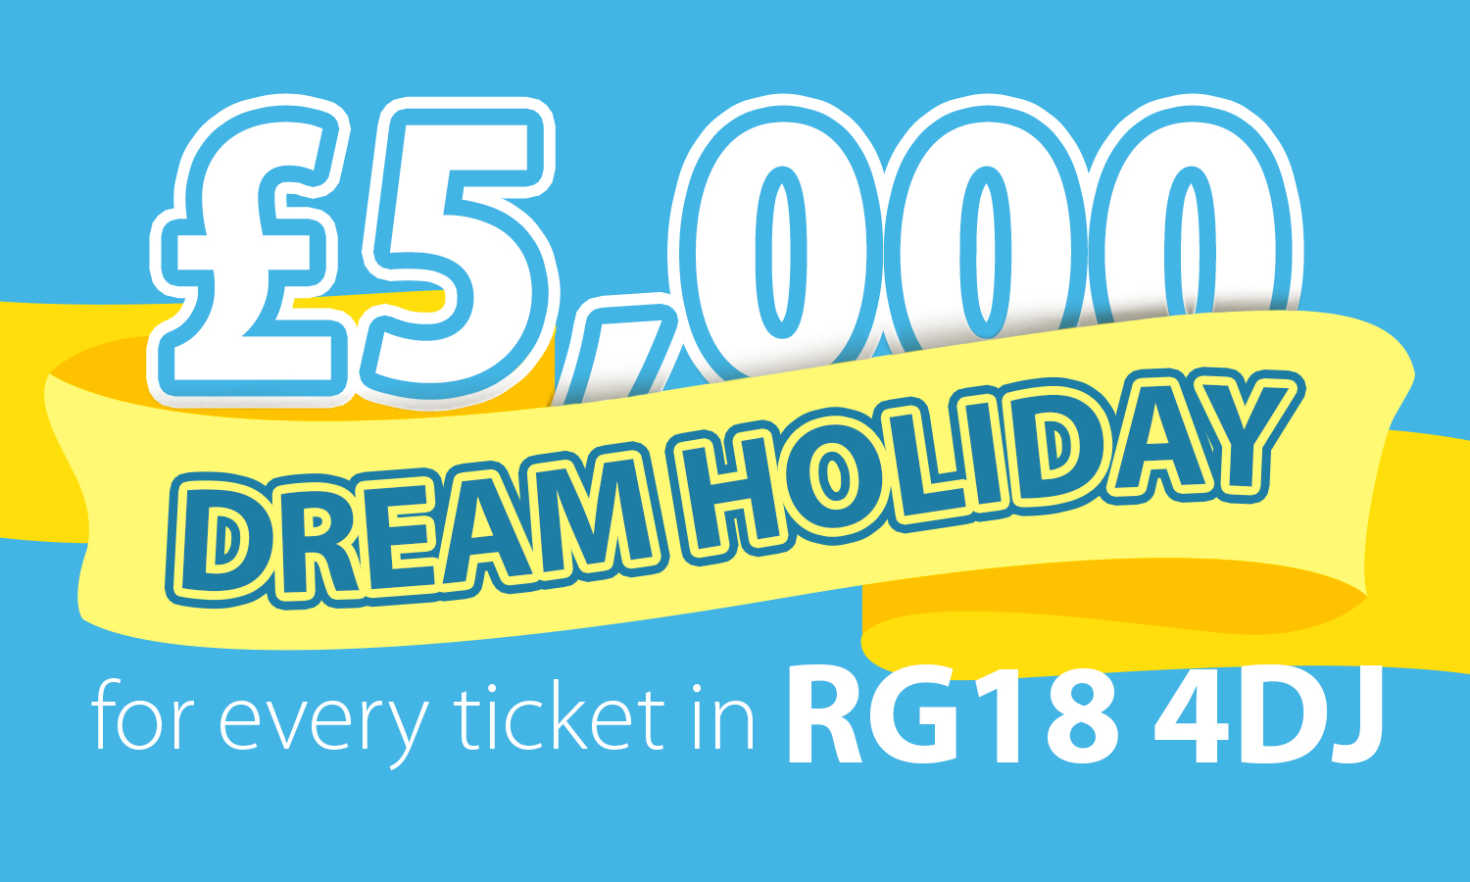 Players in Thatcham will soon be jetting off on fantastic trips, thanks to their Dream Holiday wins